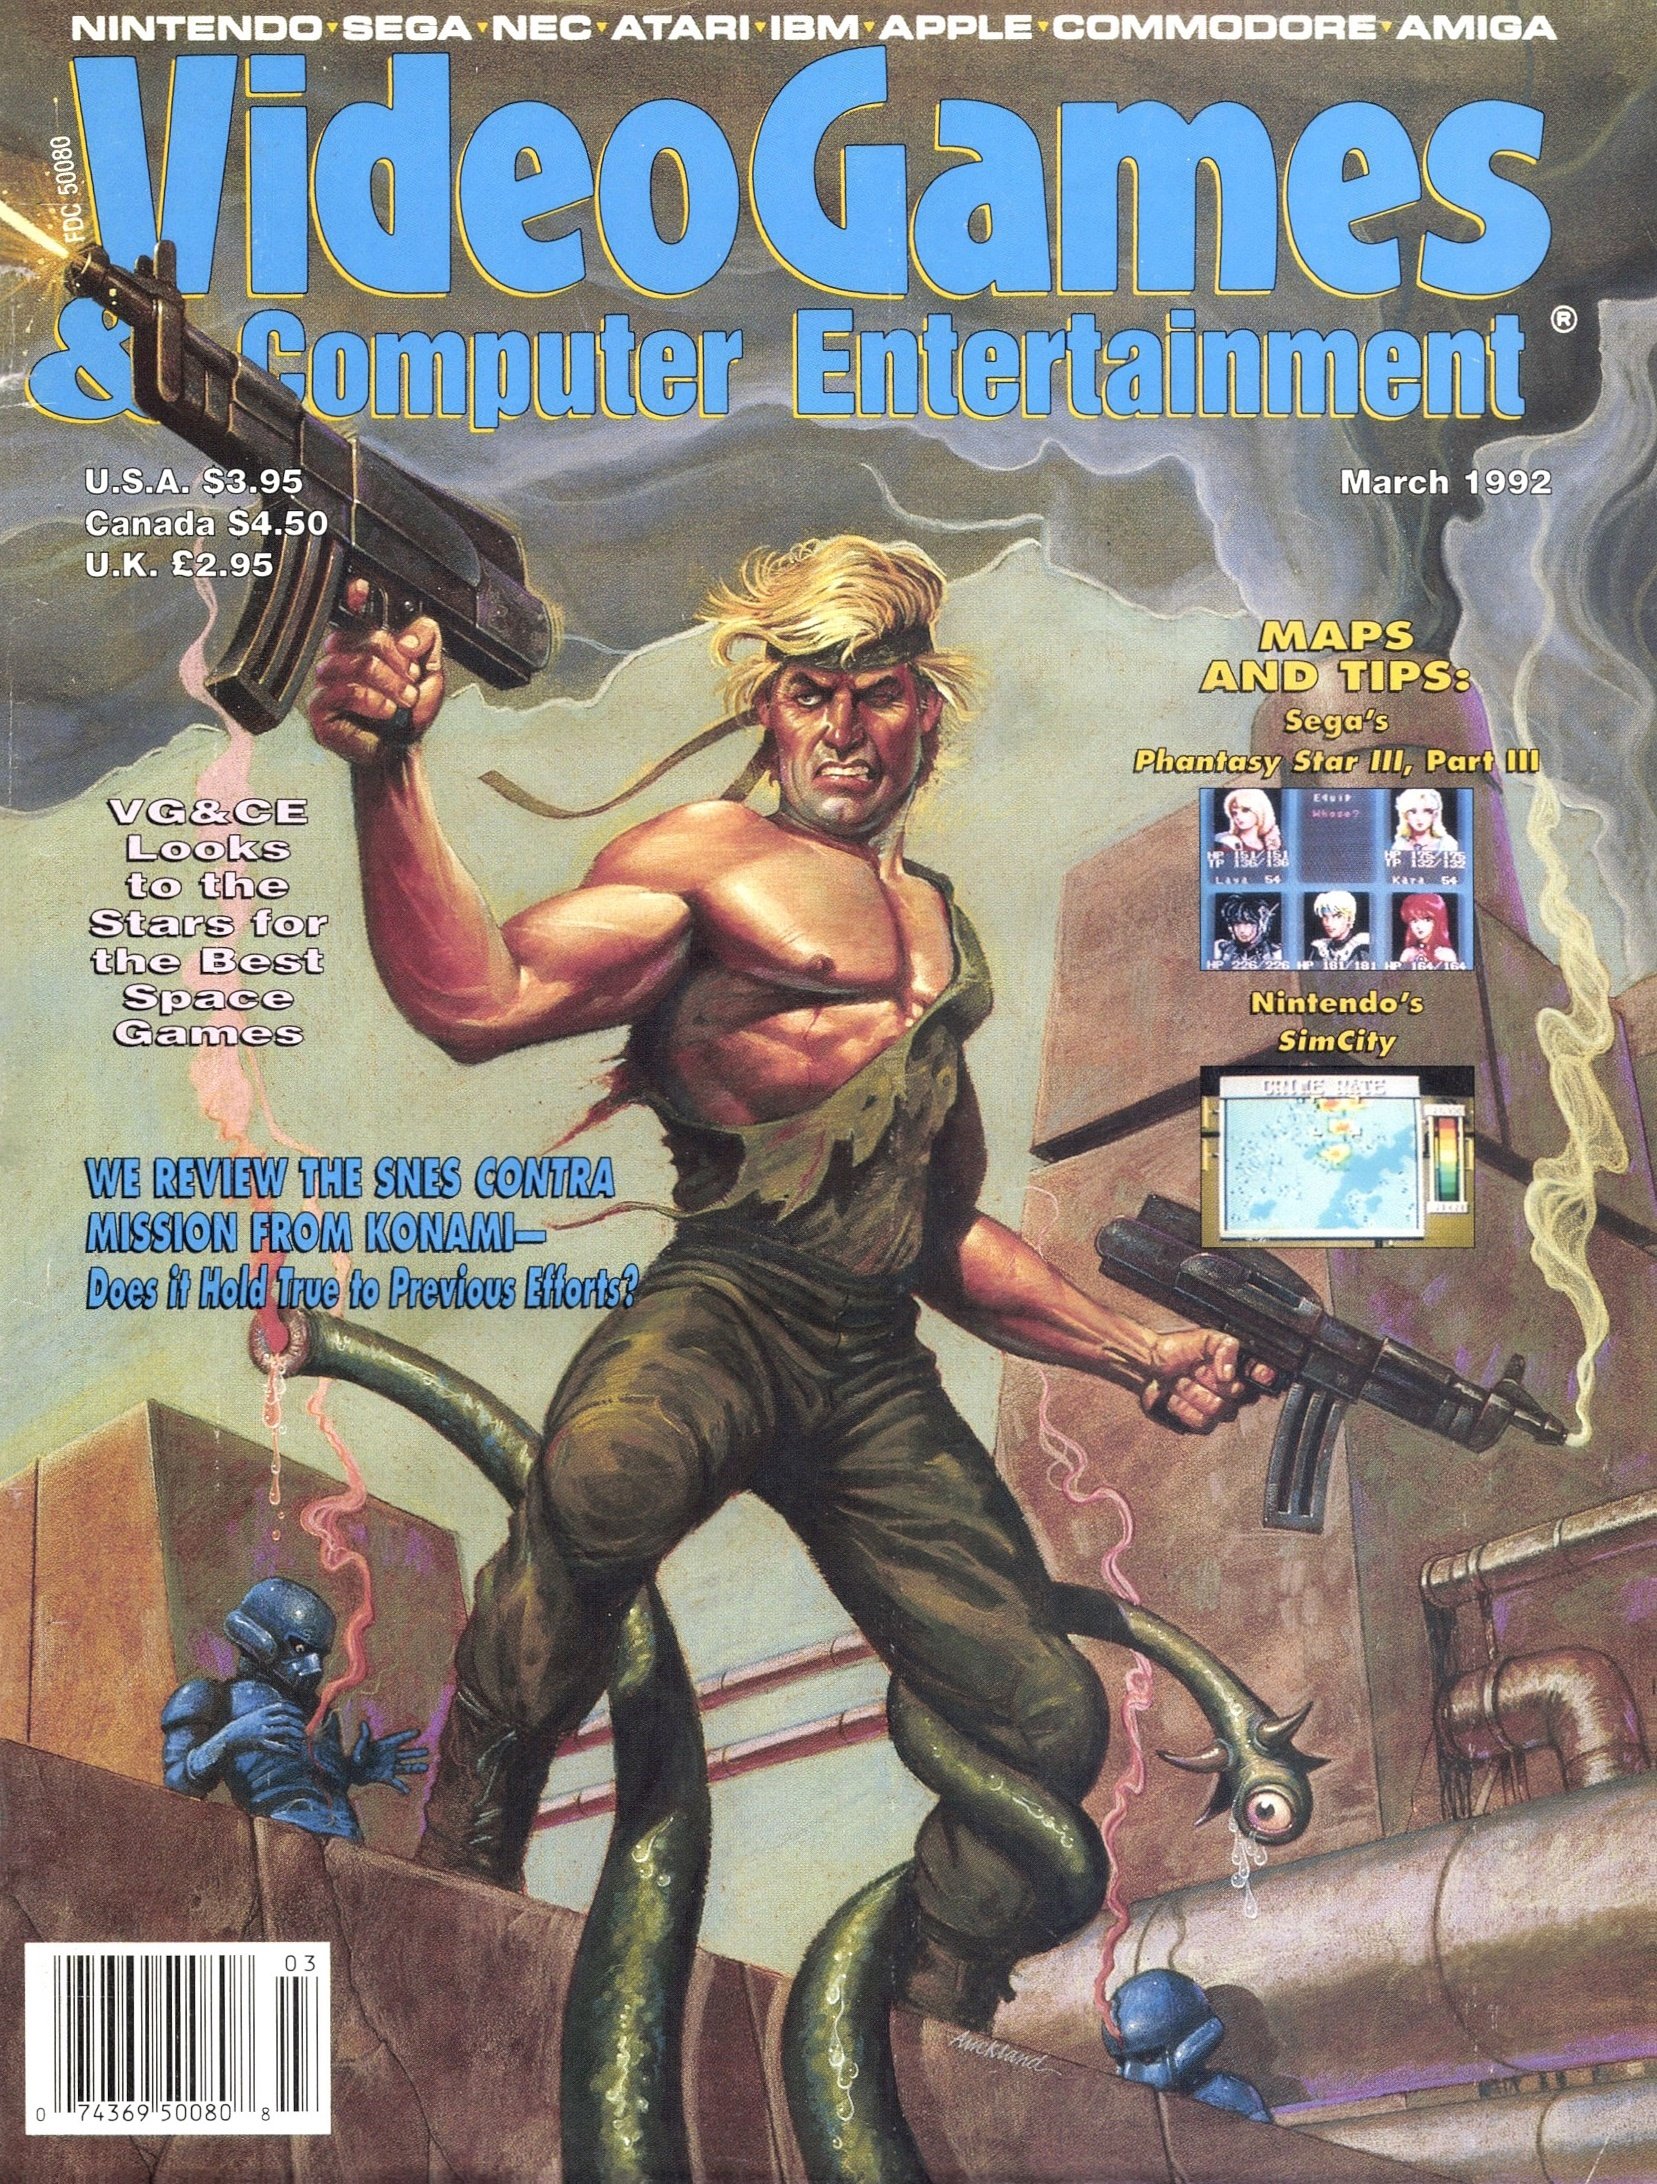 More information about "VideoGames & Computer Entertainment Issue 38 (March 1992)"